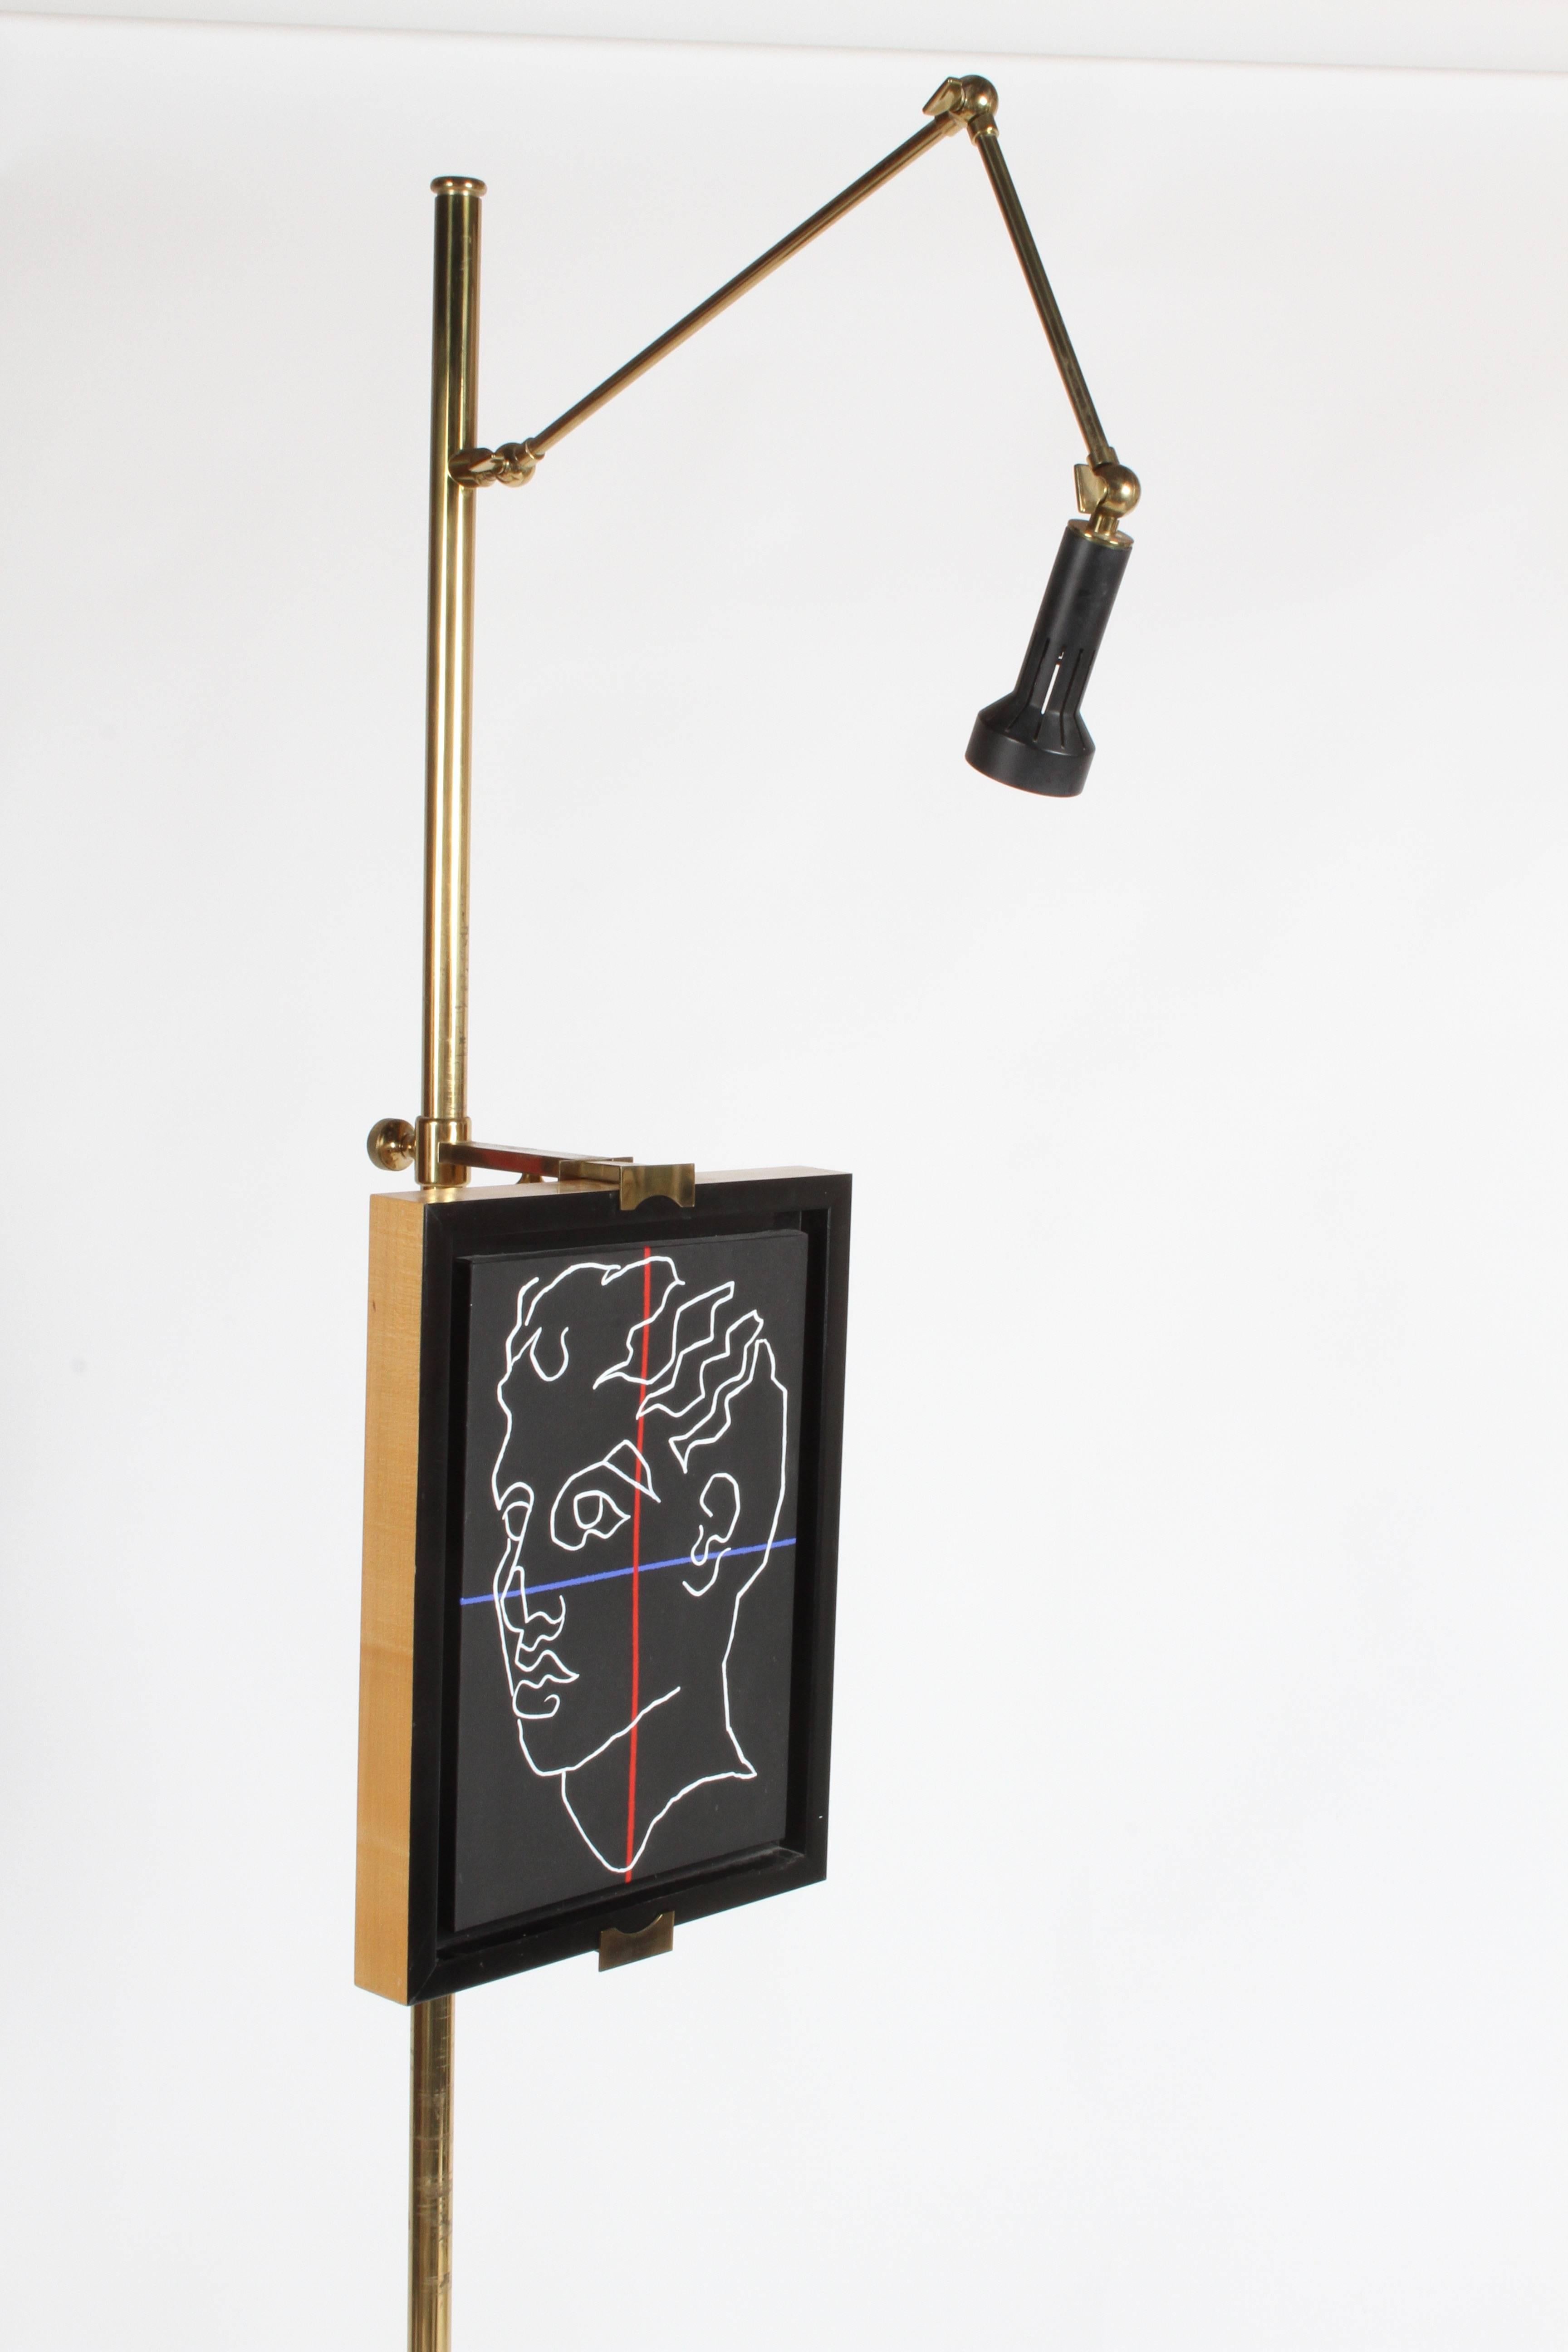 Vintage Arredoluce, Italy, art easel with lamp designed by Angelo Lelli in brass. The easel has an adjustable arm with light. The support brackets adjust up and down, also in and out. Max frame depth is 3-3/8